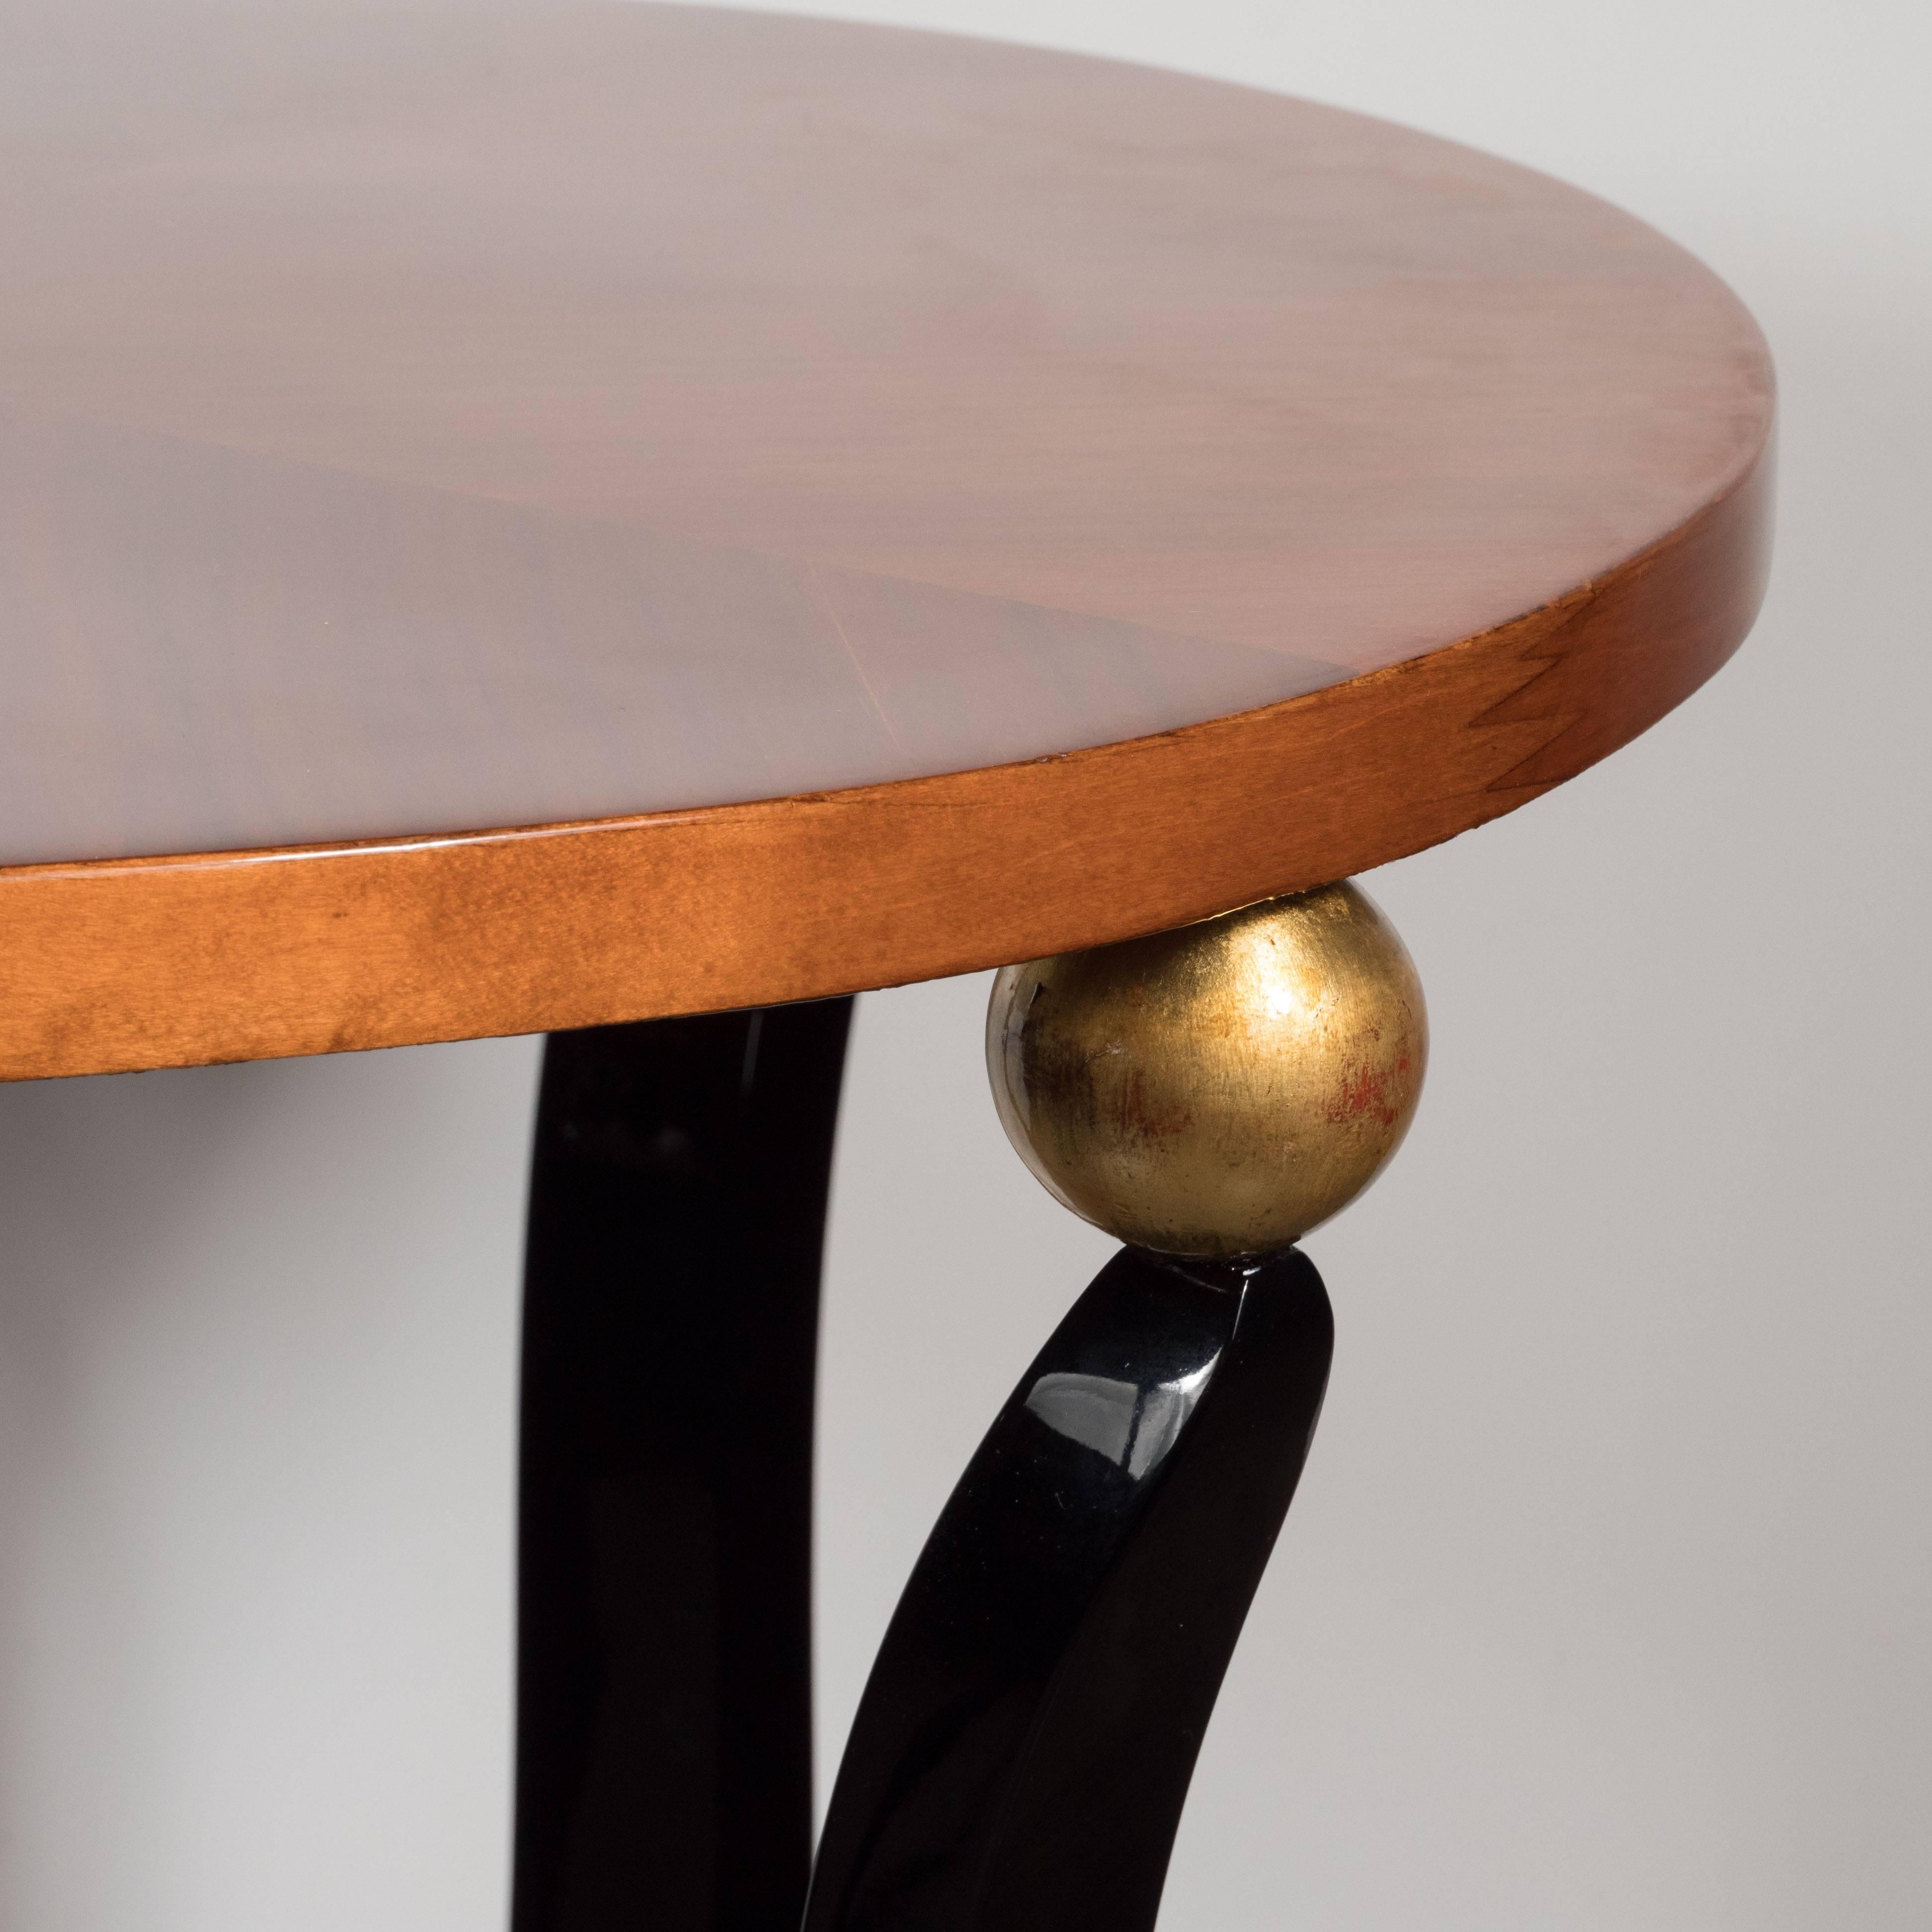 Gold Leaf Art Deco Two-Tier Gueridon Table in Bookmatched Walnut, Gold and Black Lacquer